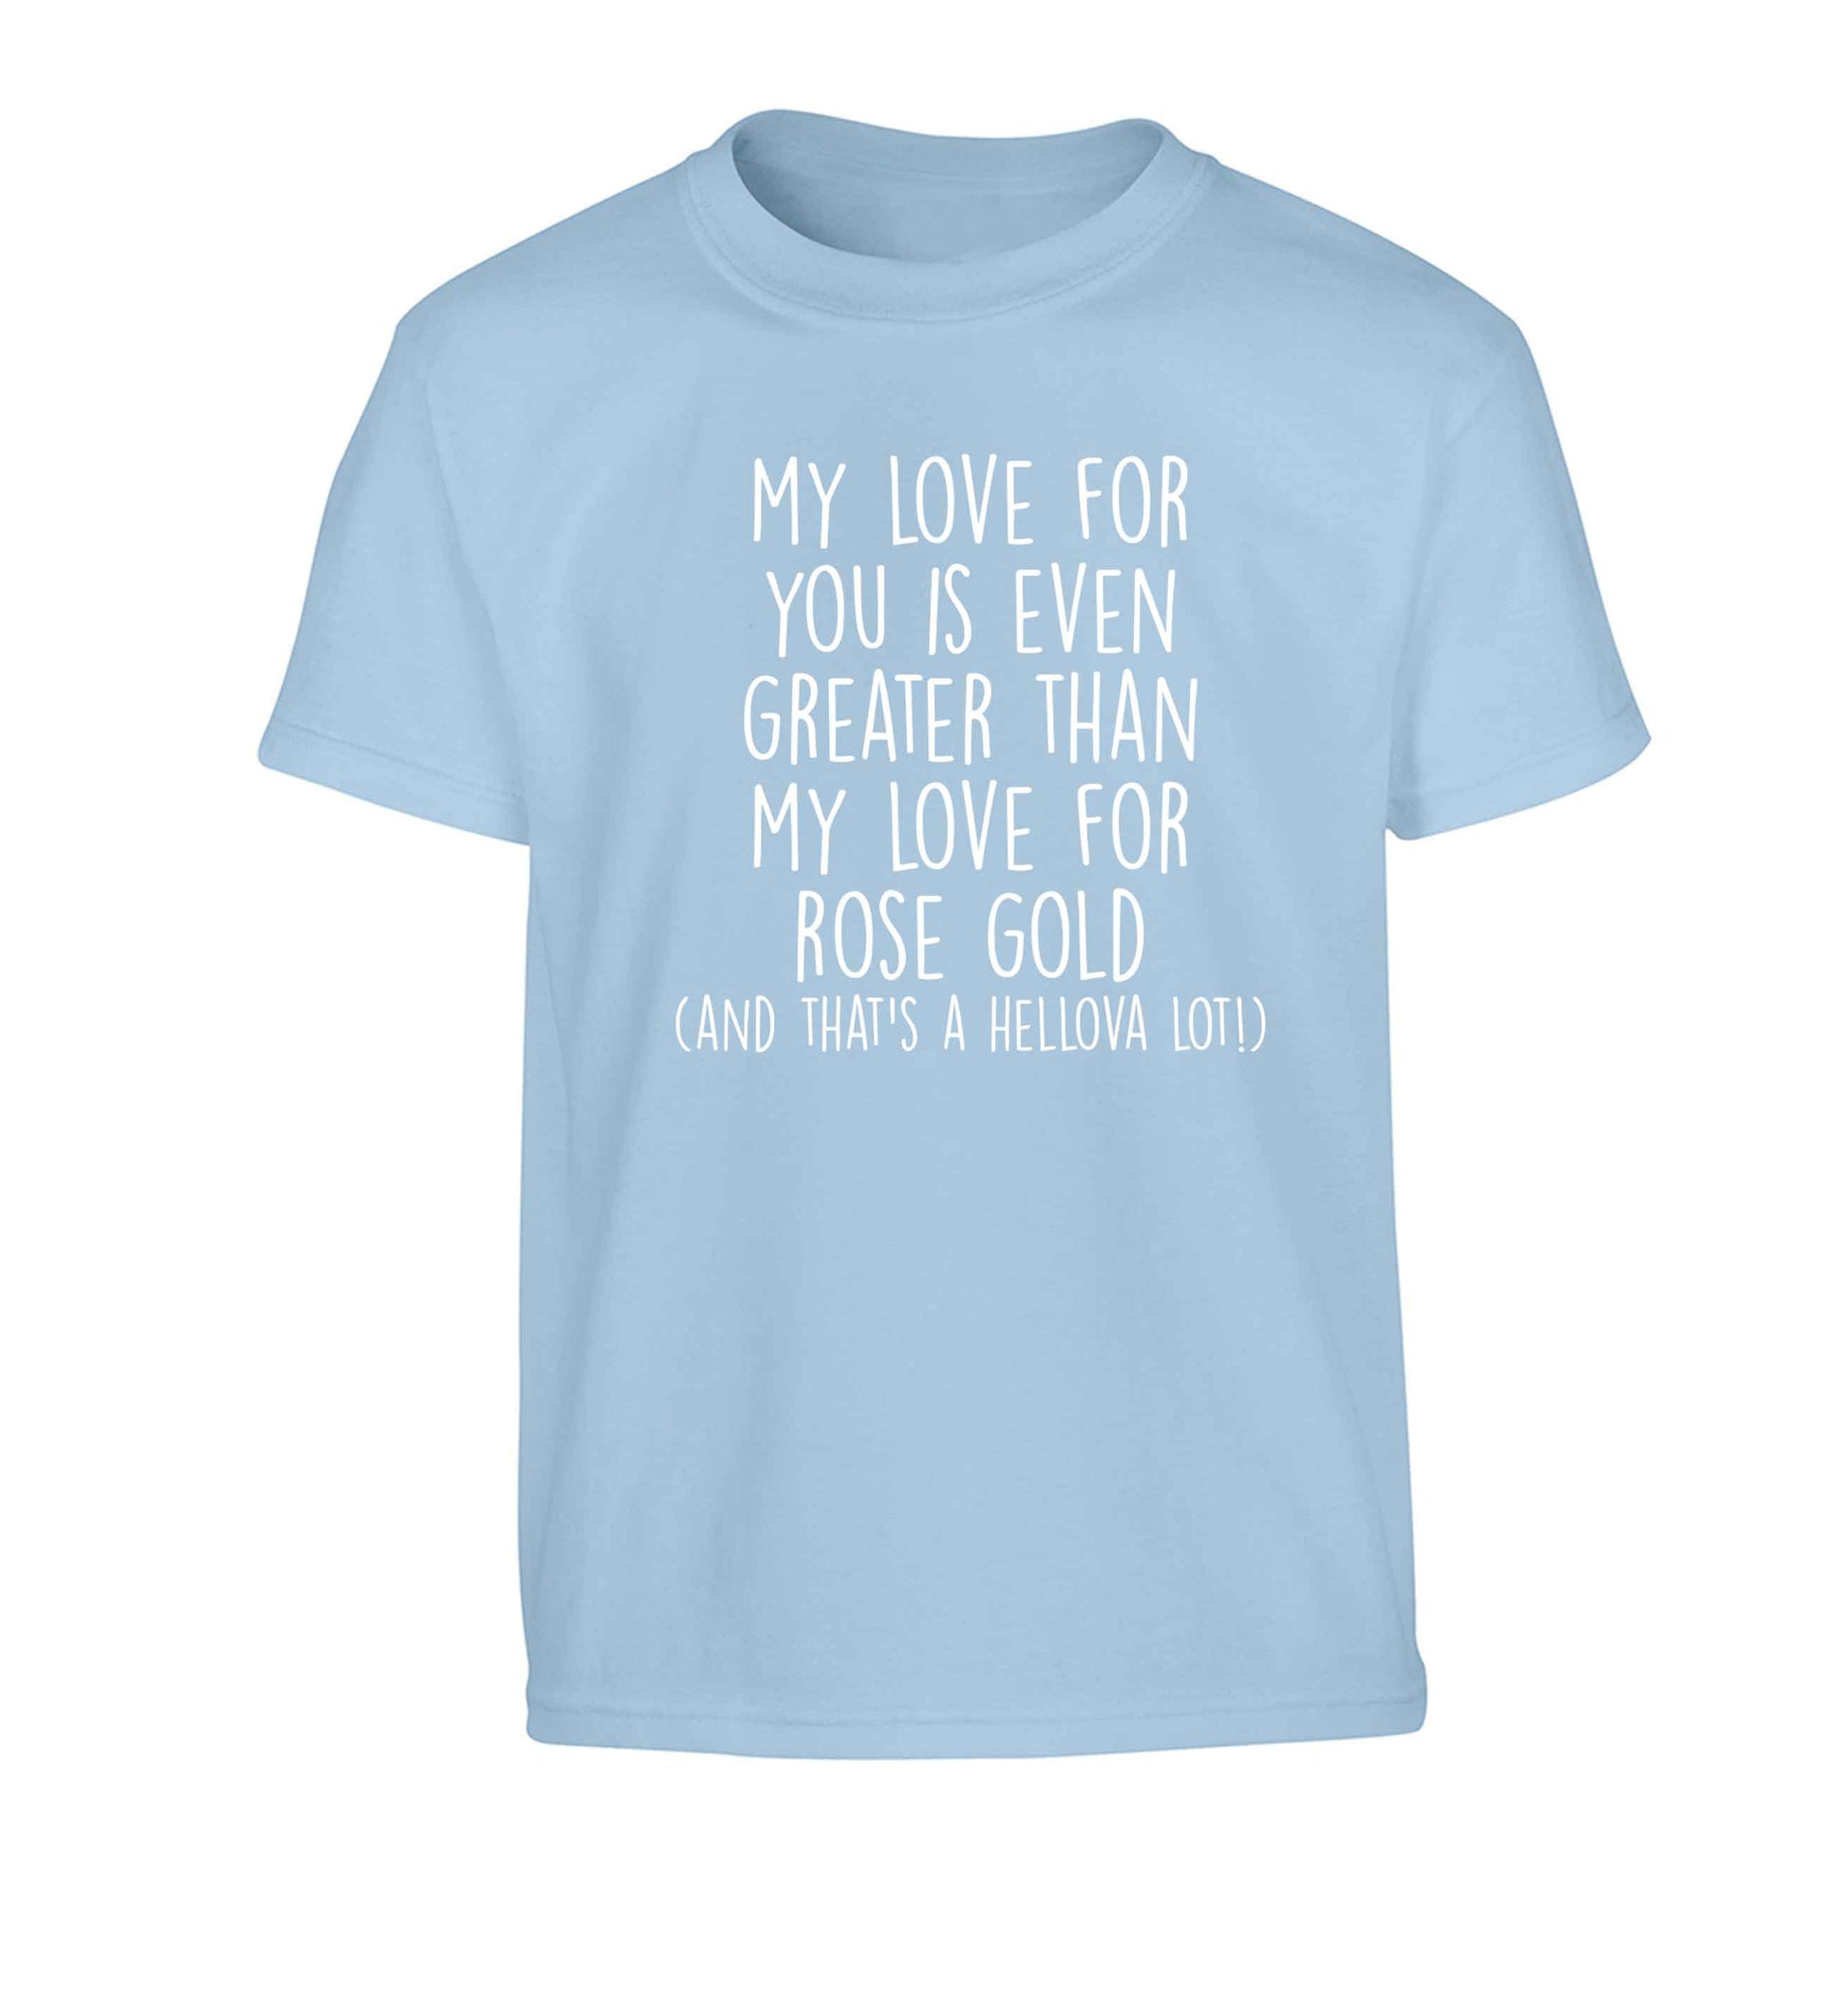 My love for you is even greater than my love for rose gold (and that's a hellova lot) Children's light blue Tshirt 12-13 Years